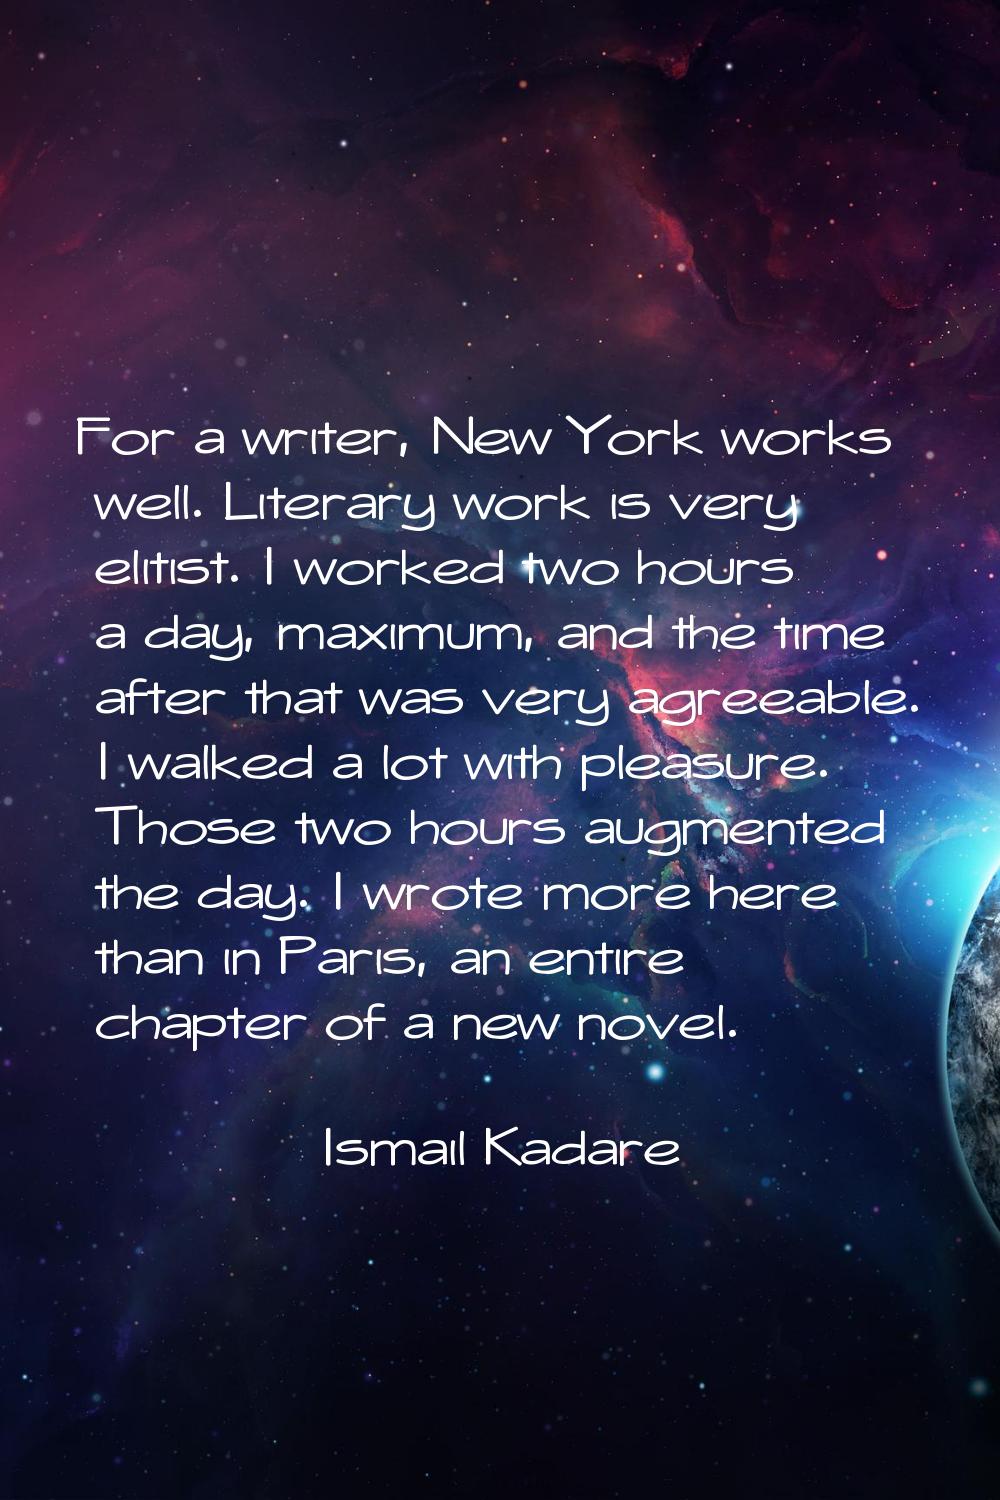 For a writer, New York works well. Literary work is very elitist. I worked two hours a day, maximum